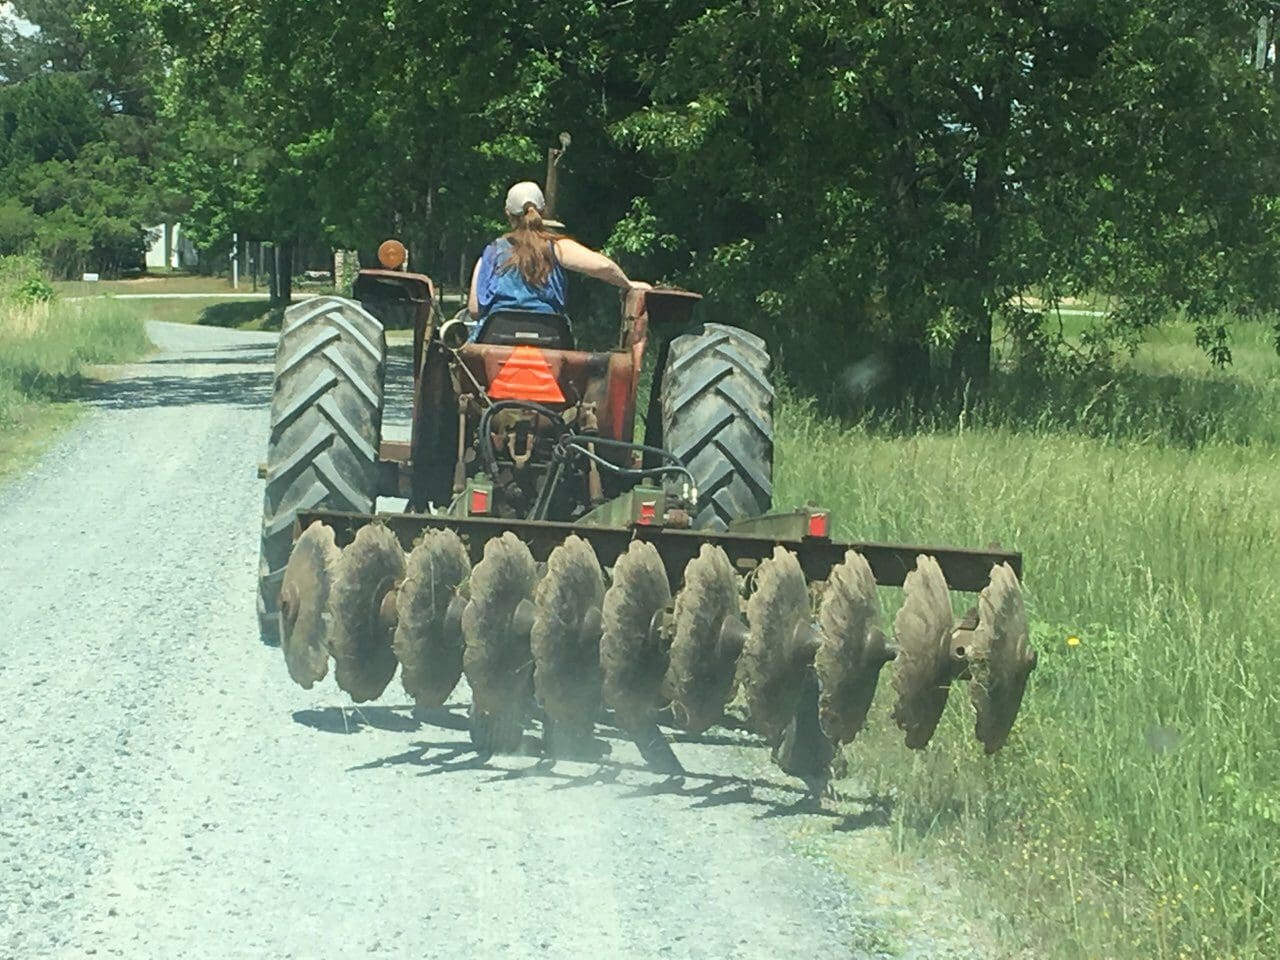 A man riding on the back of an orange tractor.